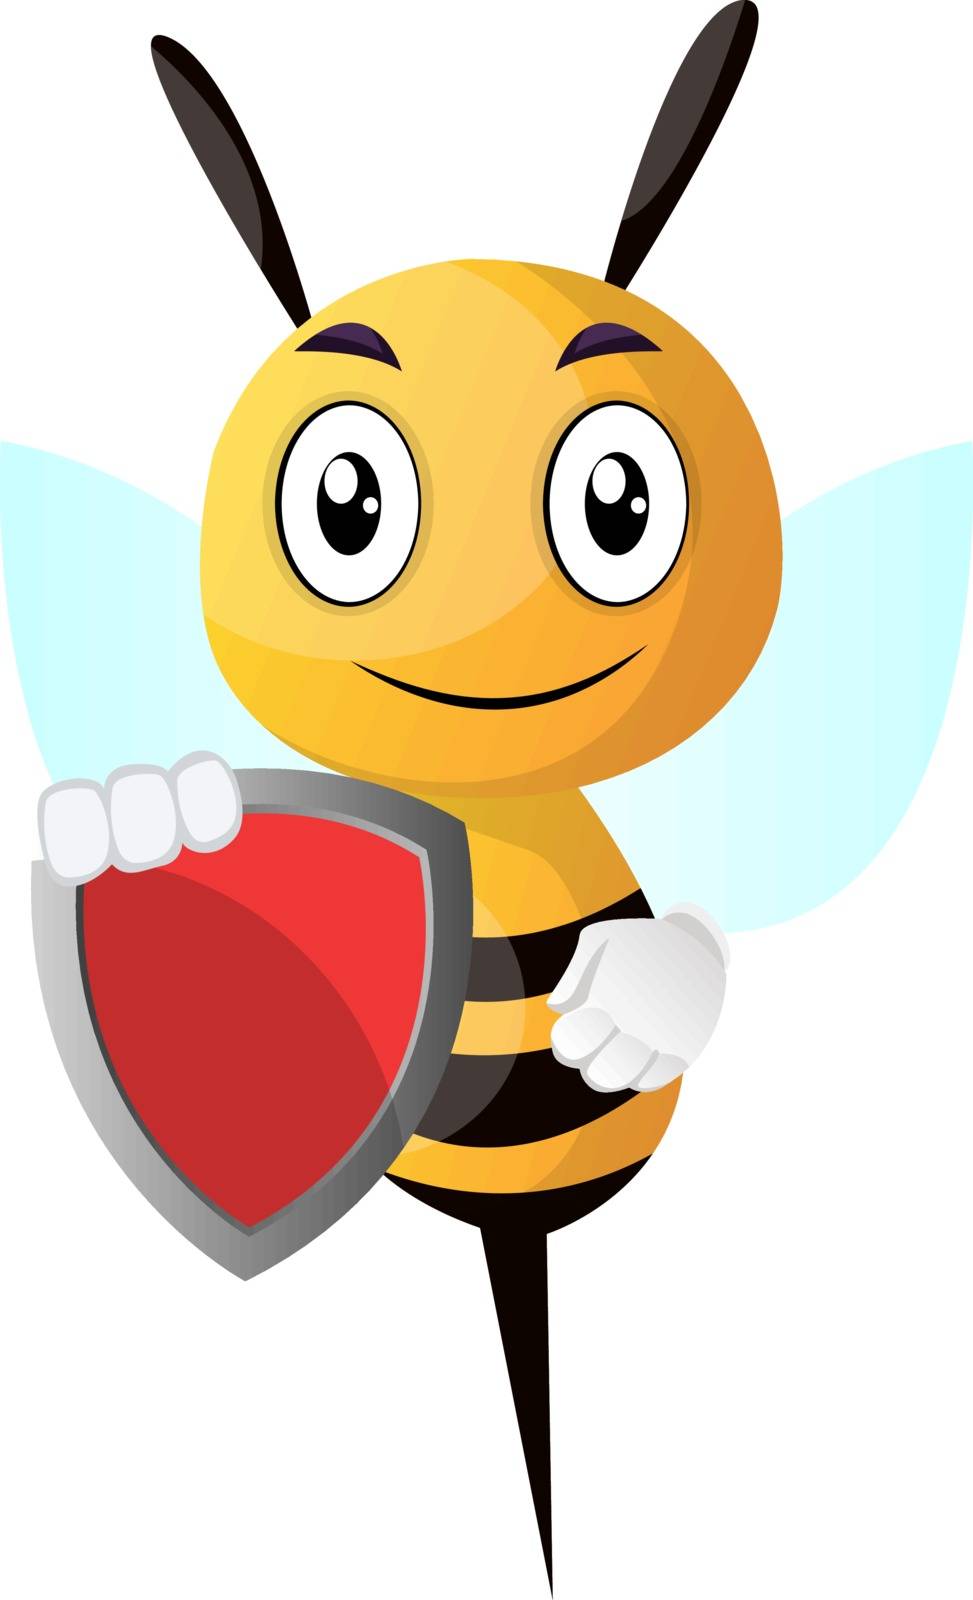 Bee holding a shield, illustration, vector on white background.